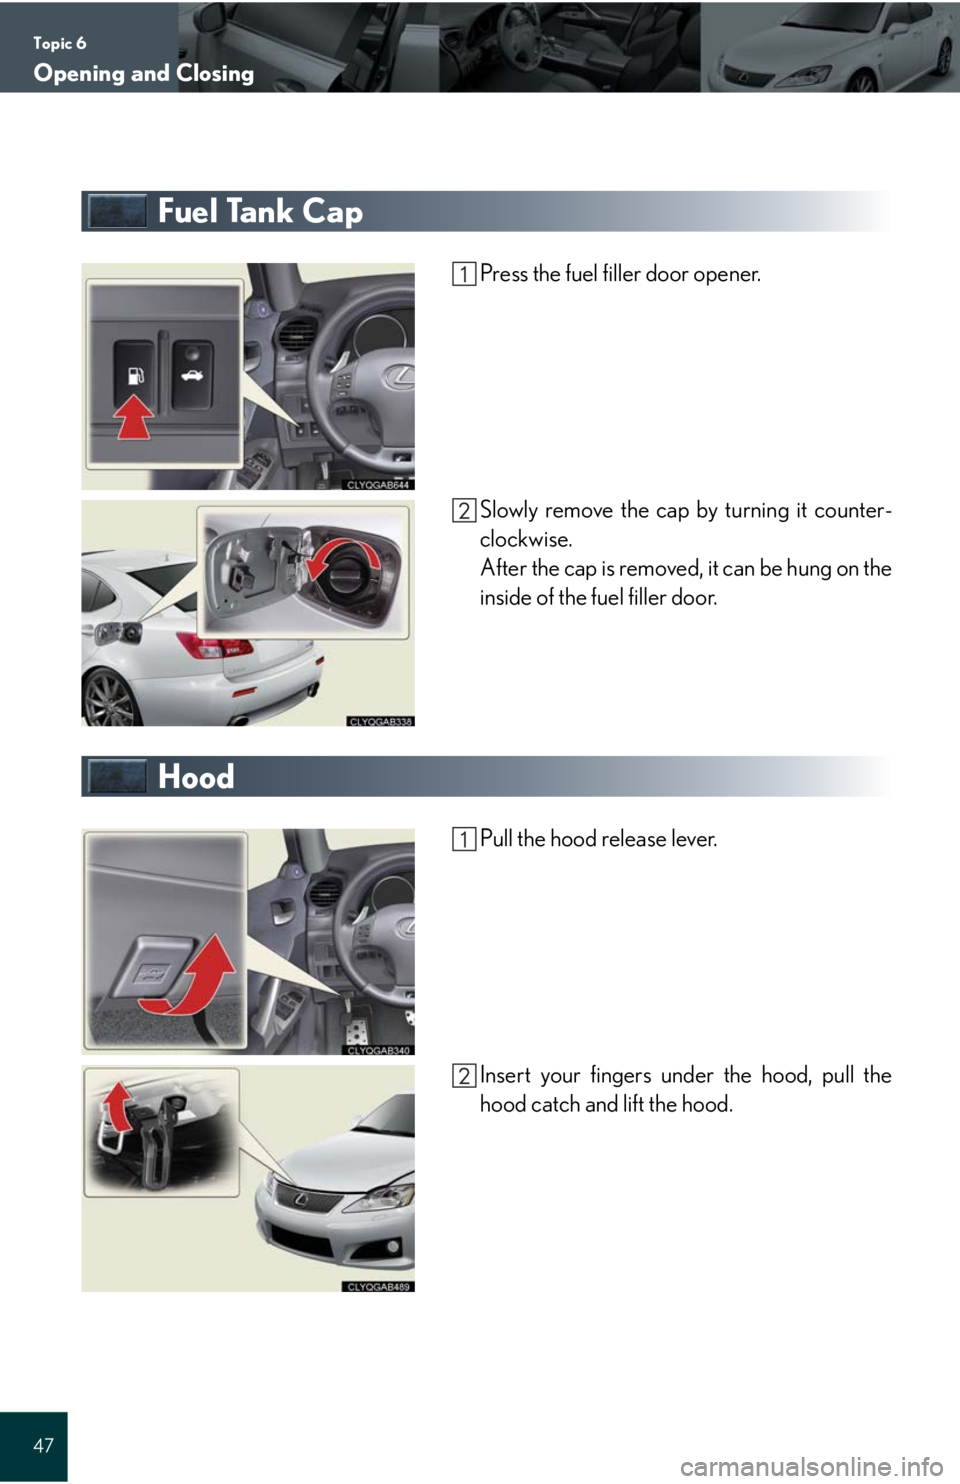 Lexus IS F 2008  Audio/video System / LEXUS 2008 IS F QUICK GUIDE OWNERS MANUAL (OM53613U) Topic 6
Opening and Closing
47
Fuel Tank Cap
Press the fuel filler door opener.
Slowly remove the cap by turning it counter-
clockwise.
After the cap is removed, it can be hung on the
inside of the fu